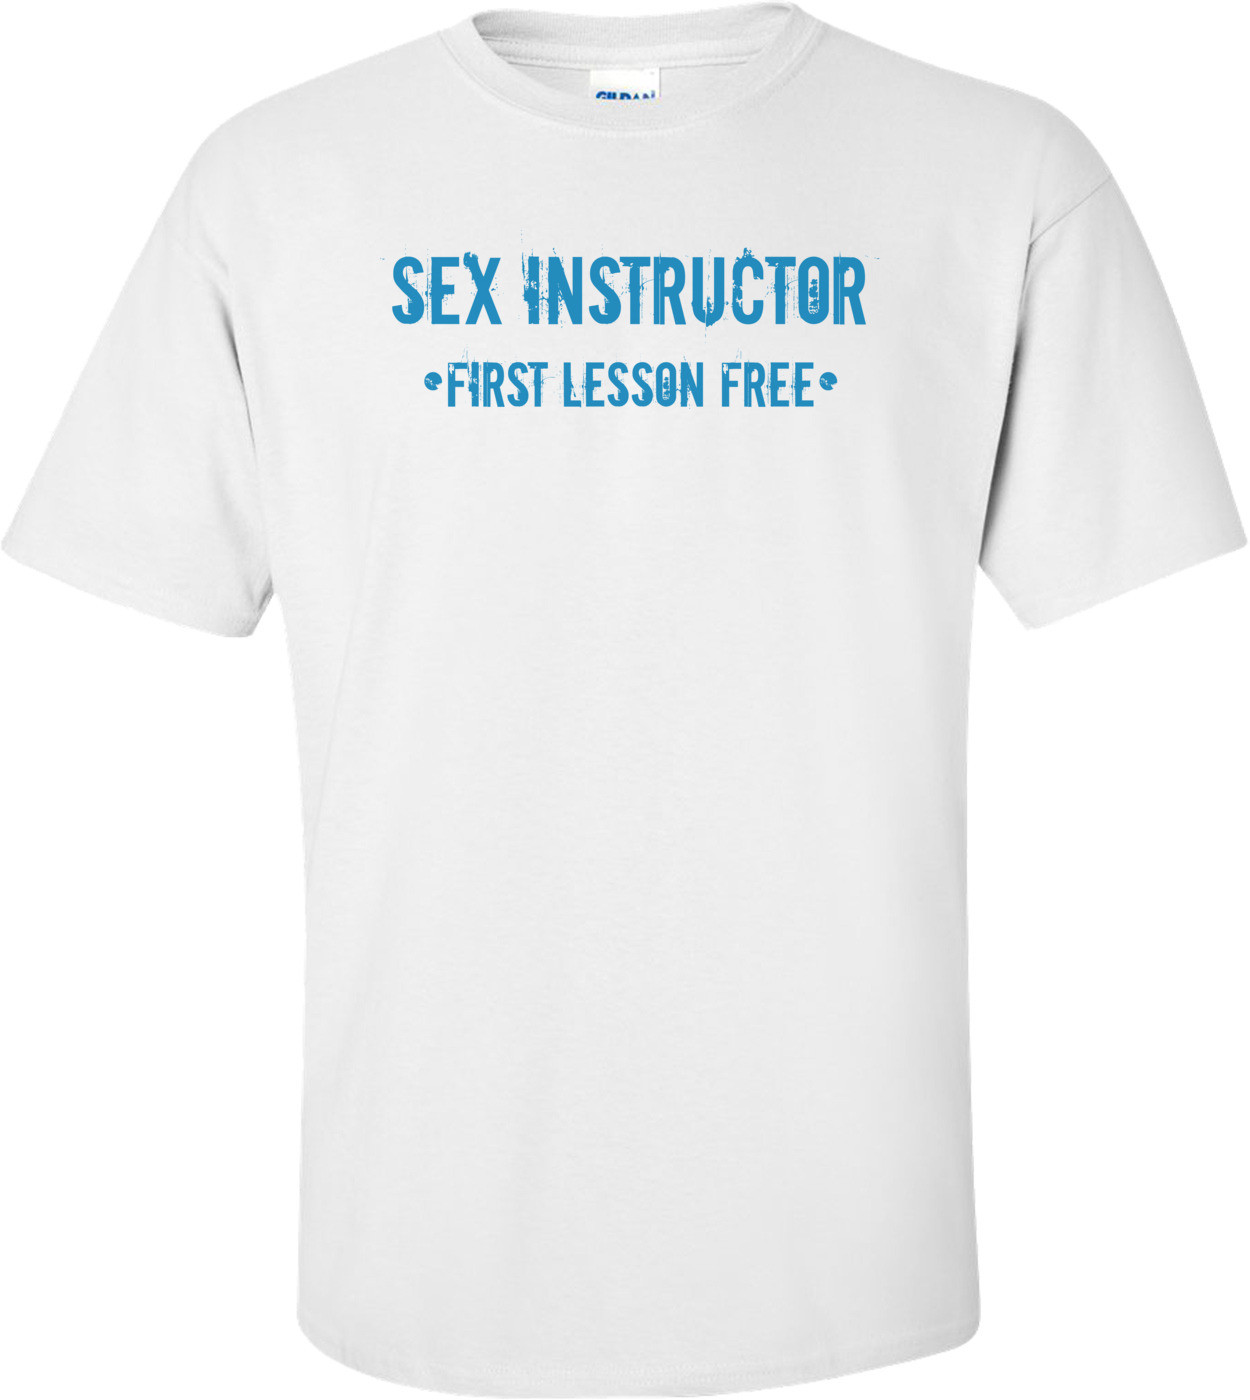 Sex Instructor, First Lesson Free 